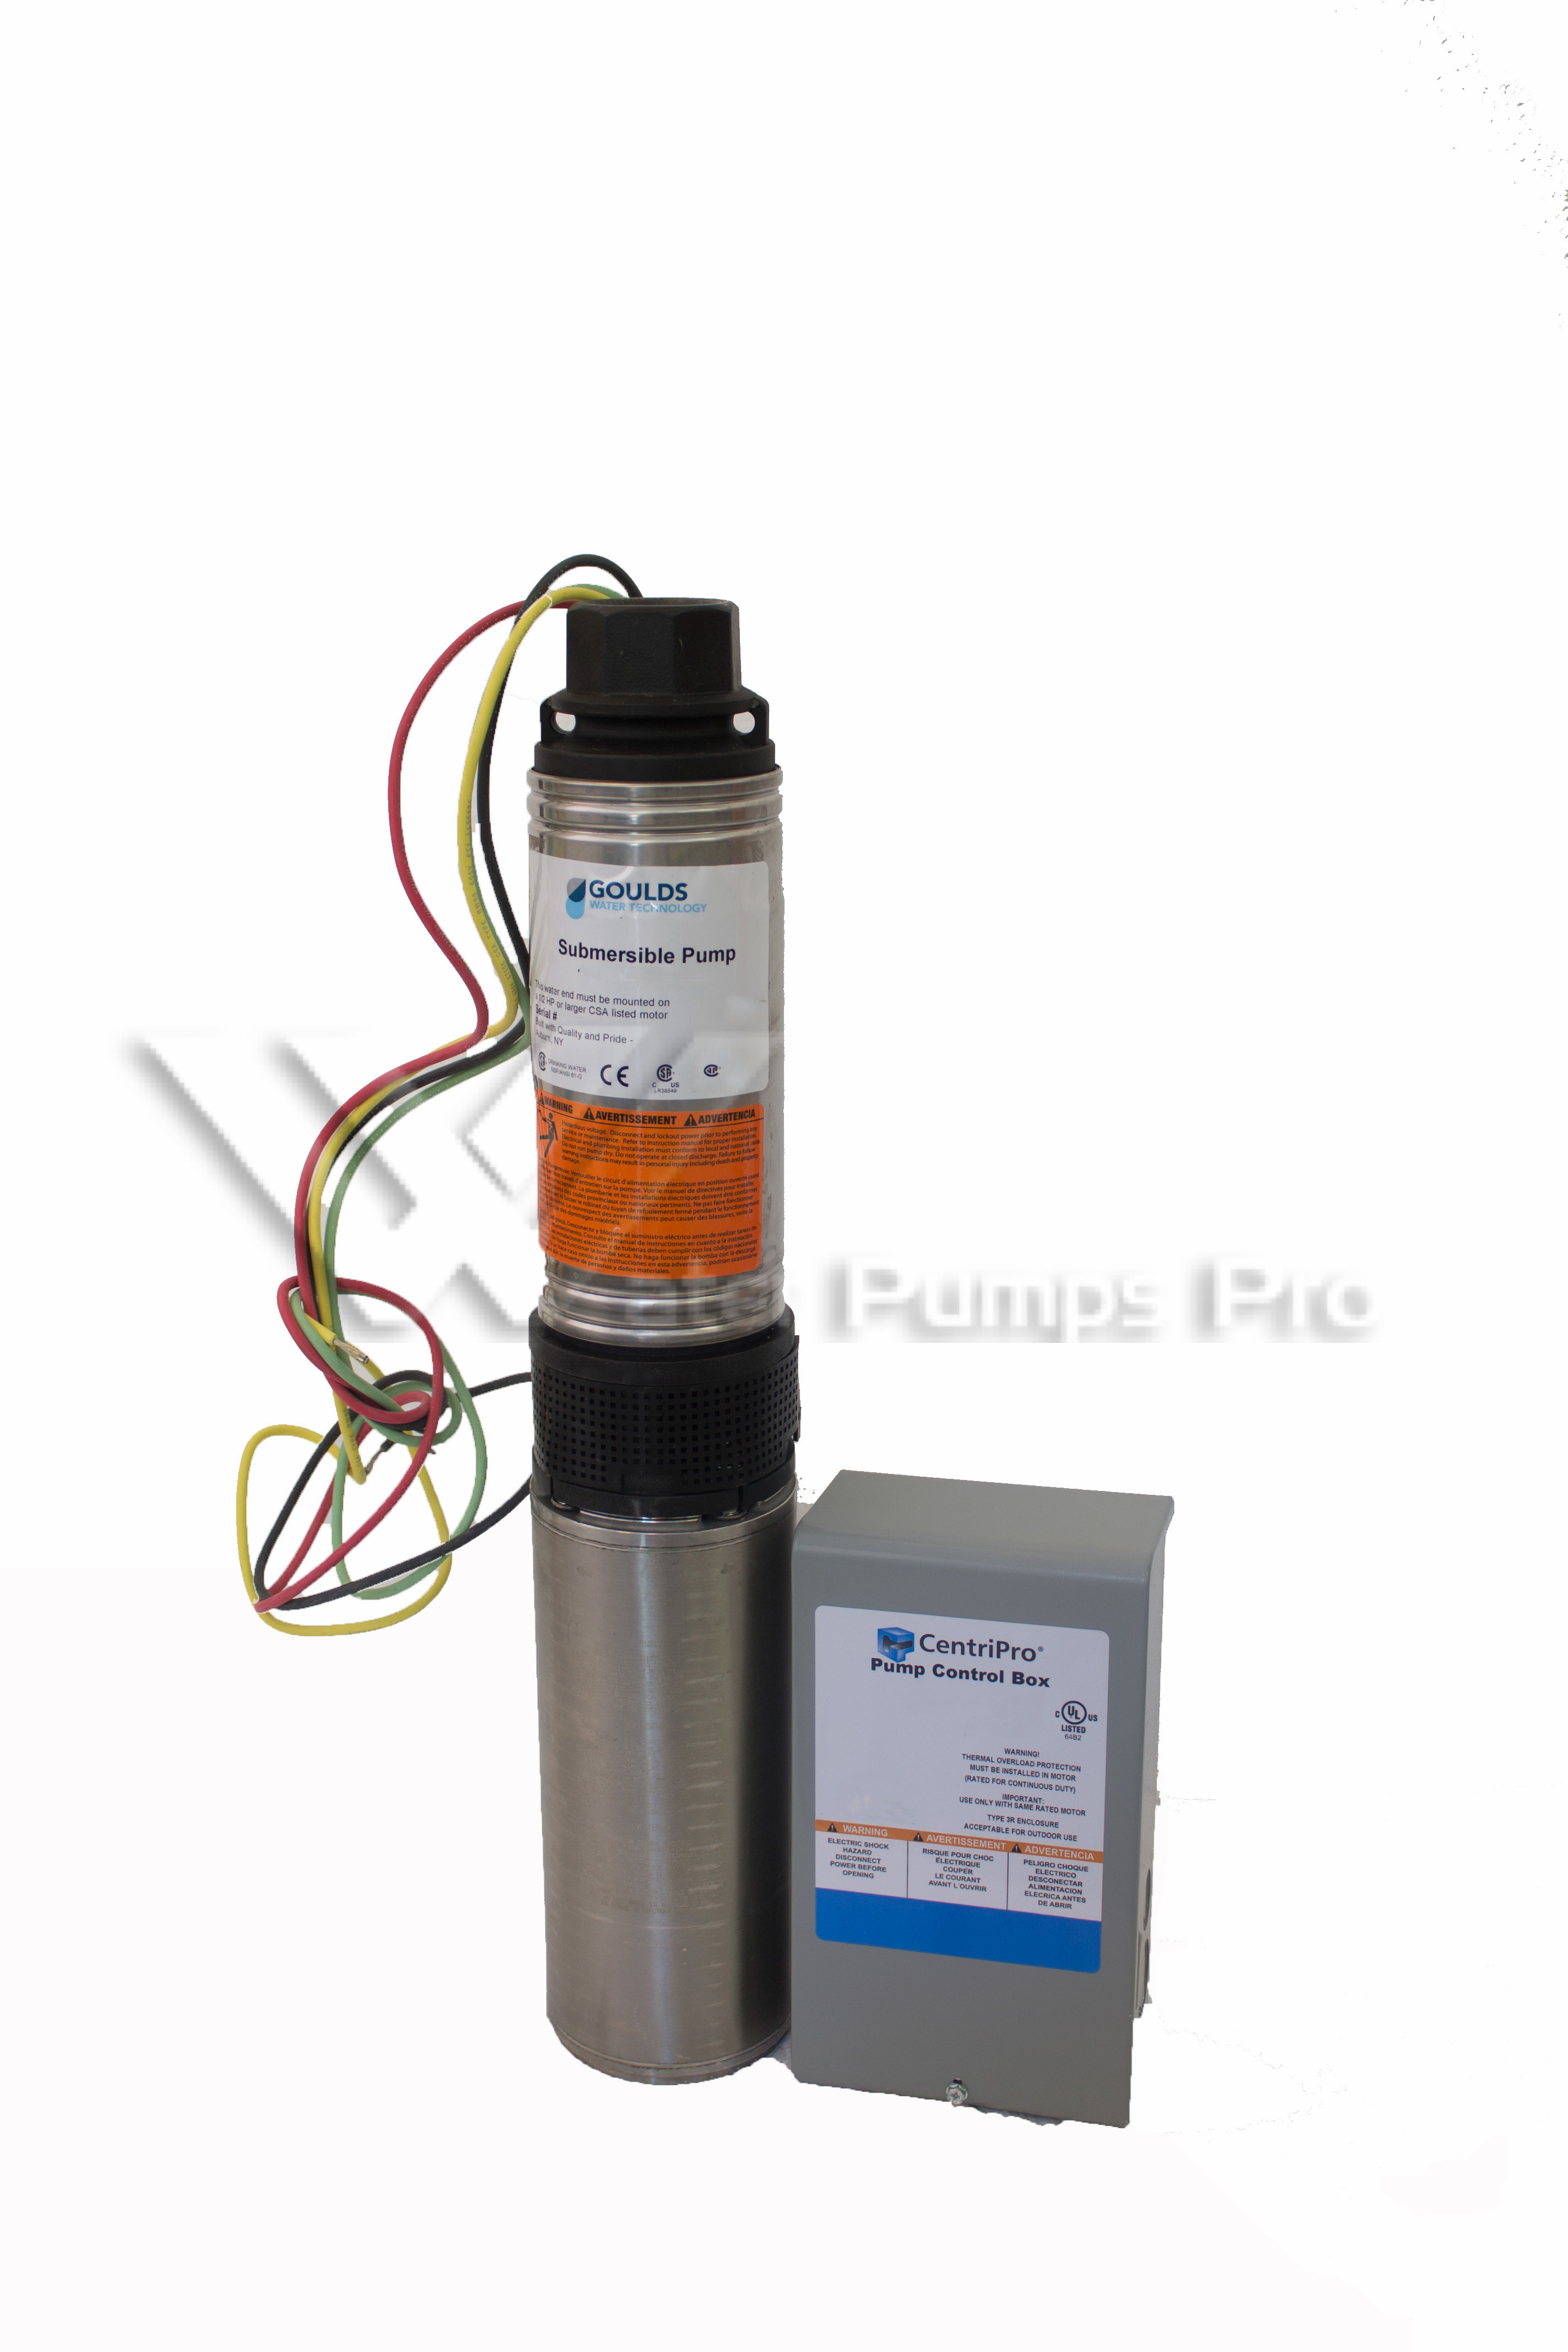 Goulds 10HS07412C Submersible Water Well Pump 3/4HP 230V 3Wire